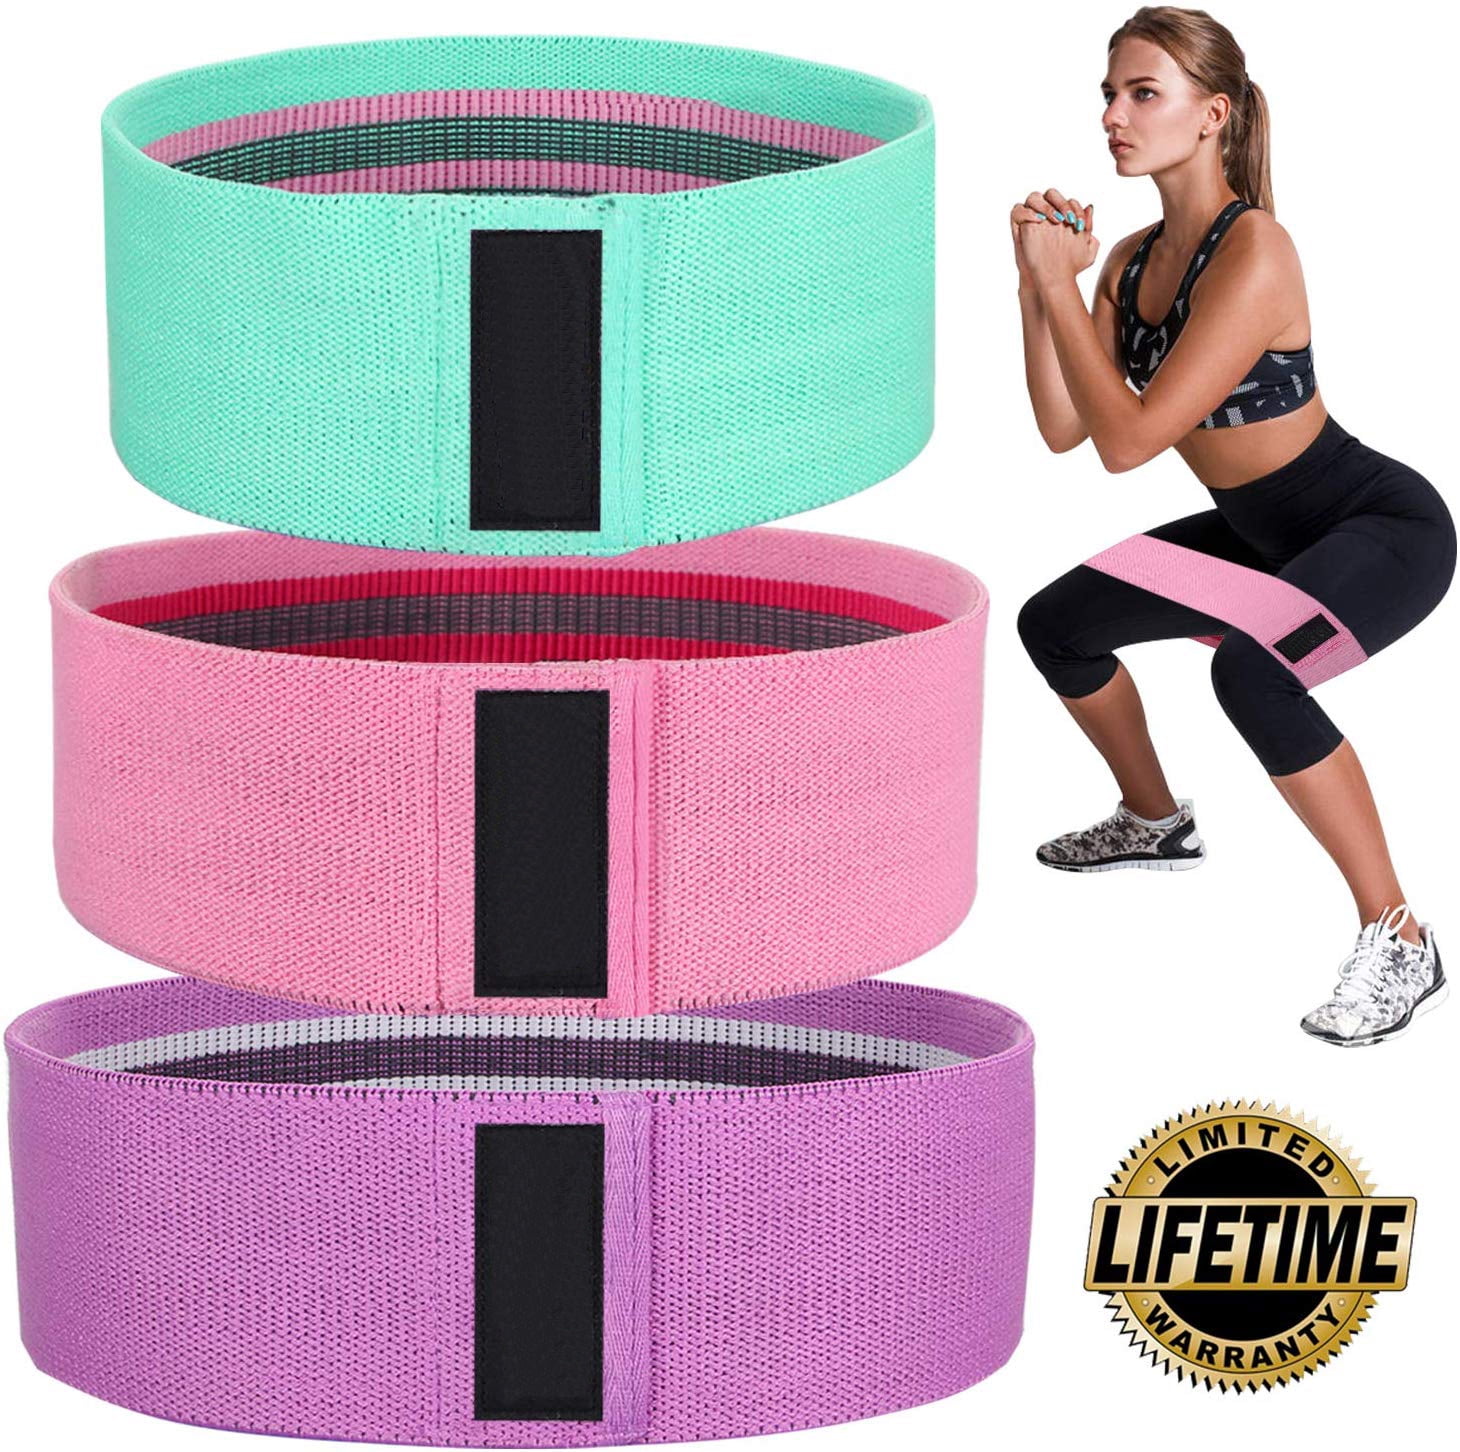 Yoga Non Slip Fabric Resistance Bands Butt Exercise Loop Circles Set Legs Glutes 